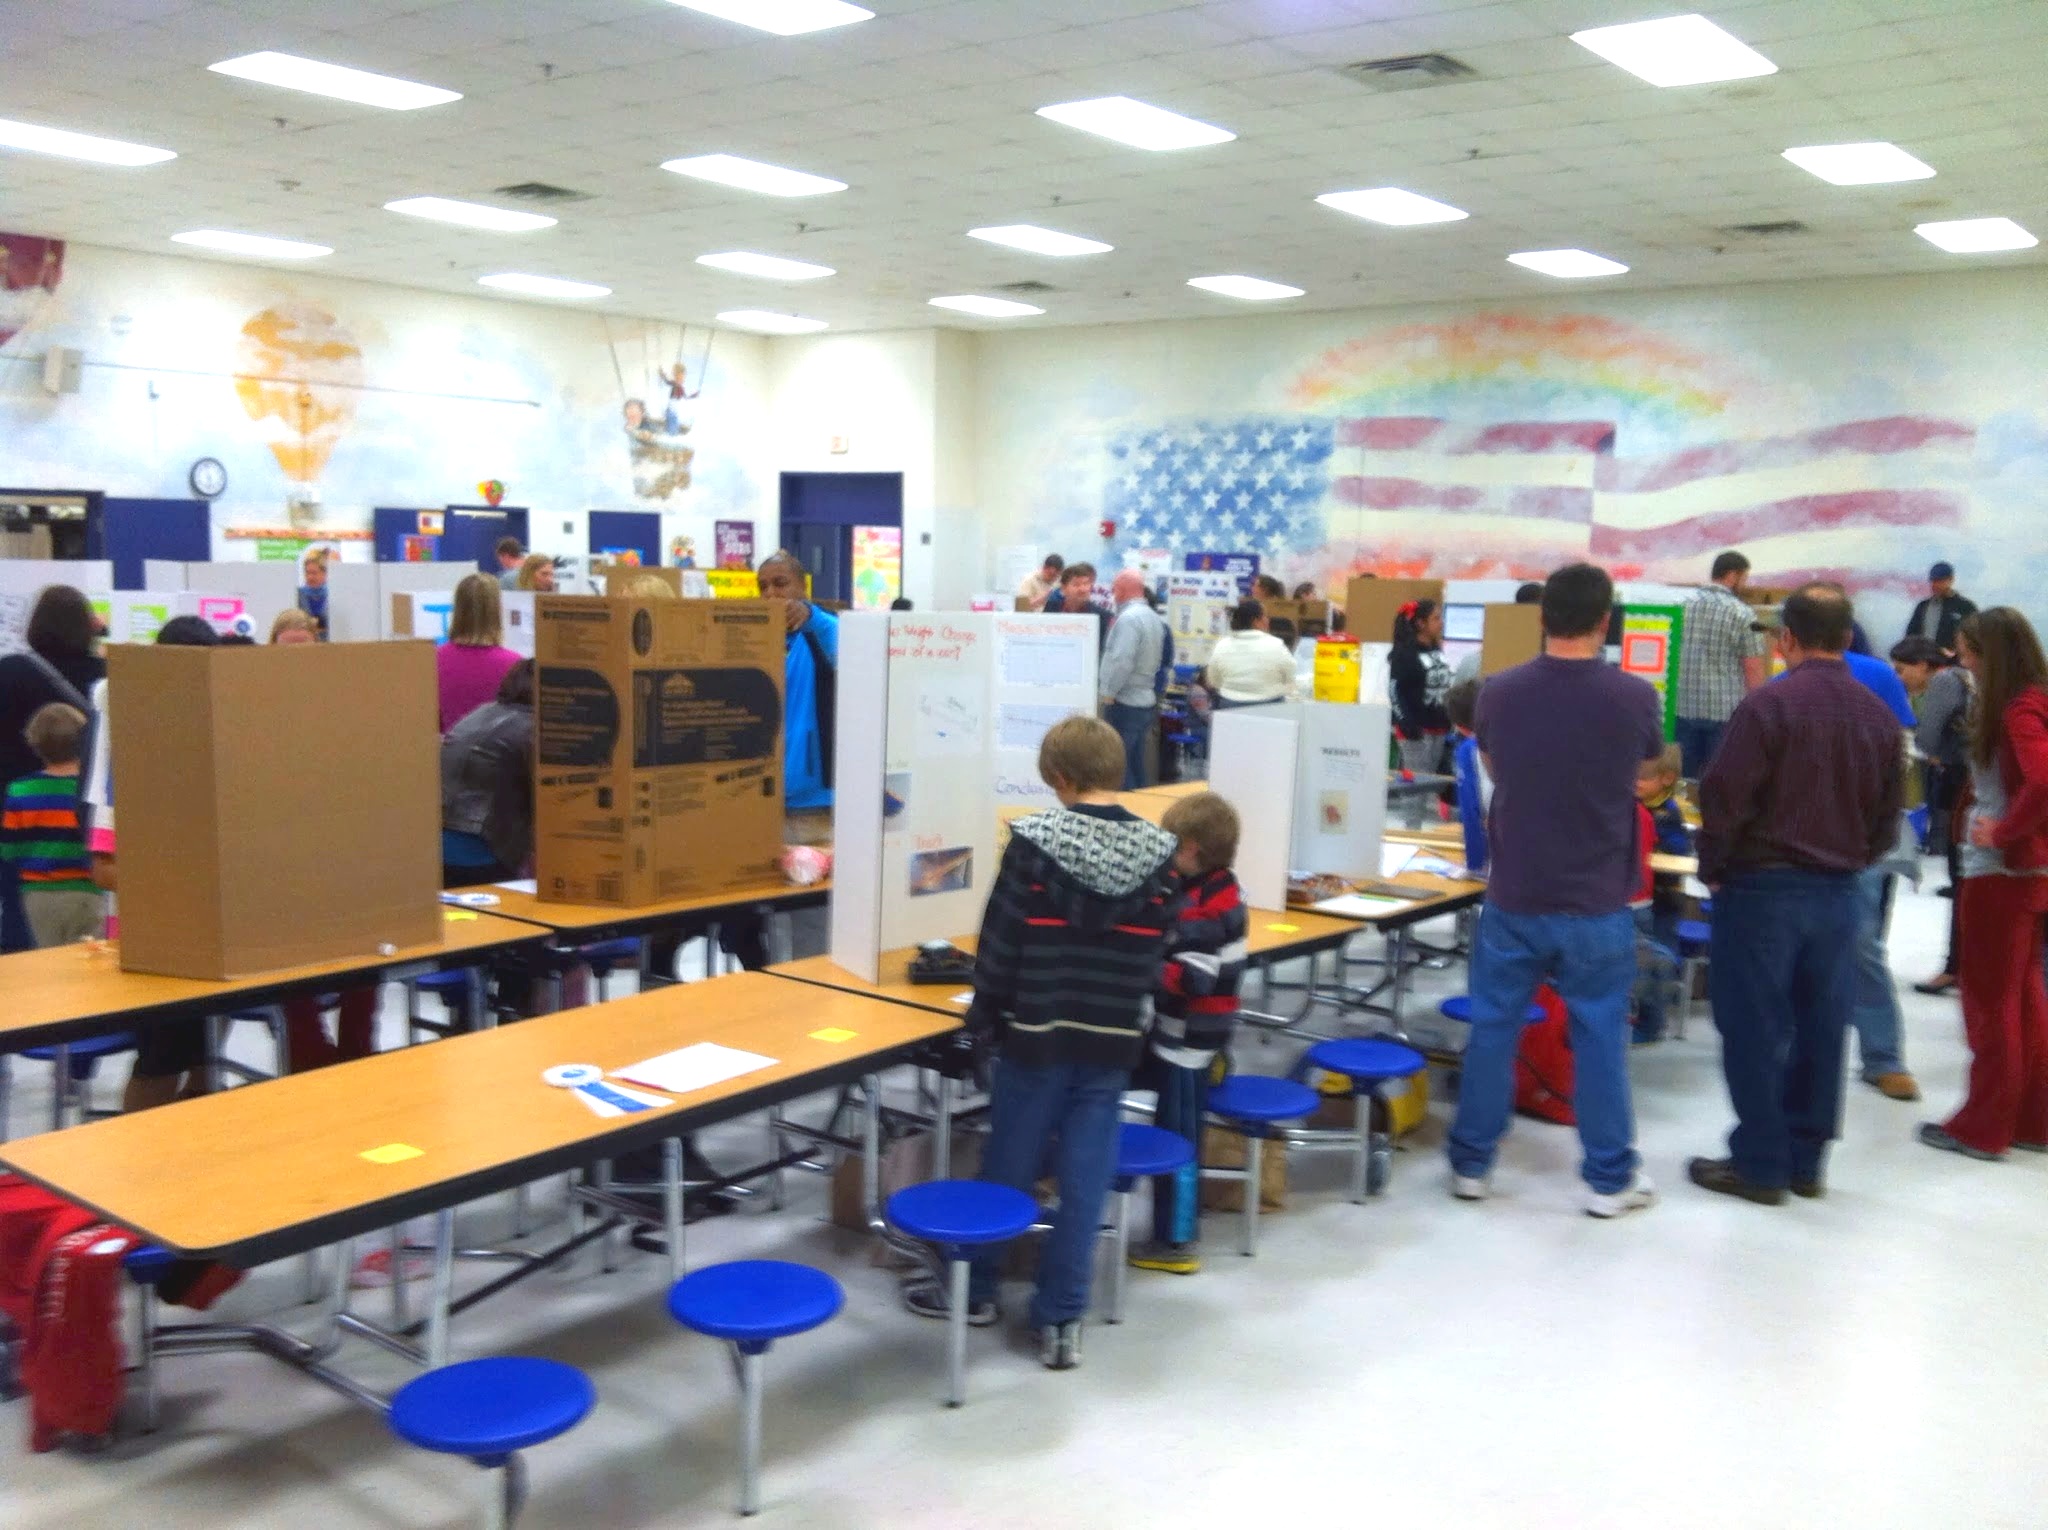 The science expo was in the school cafeteria. It got quite a bit more crowded than this.